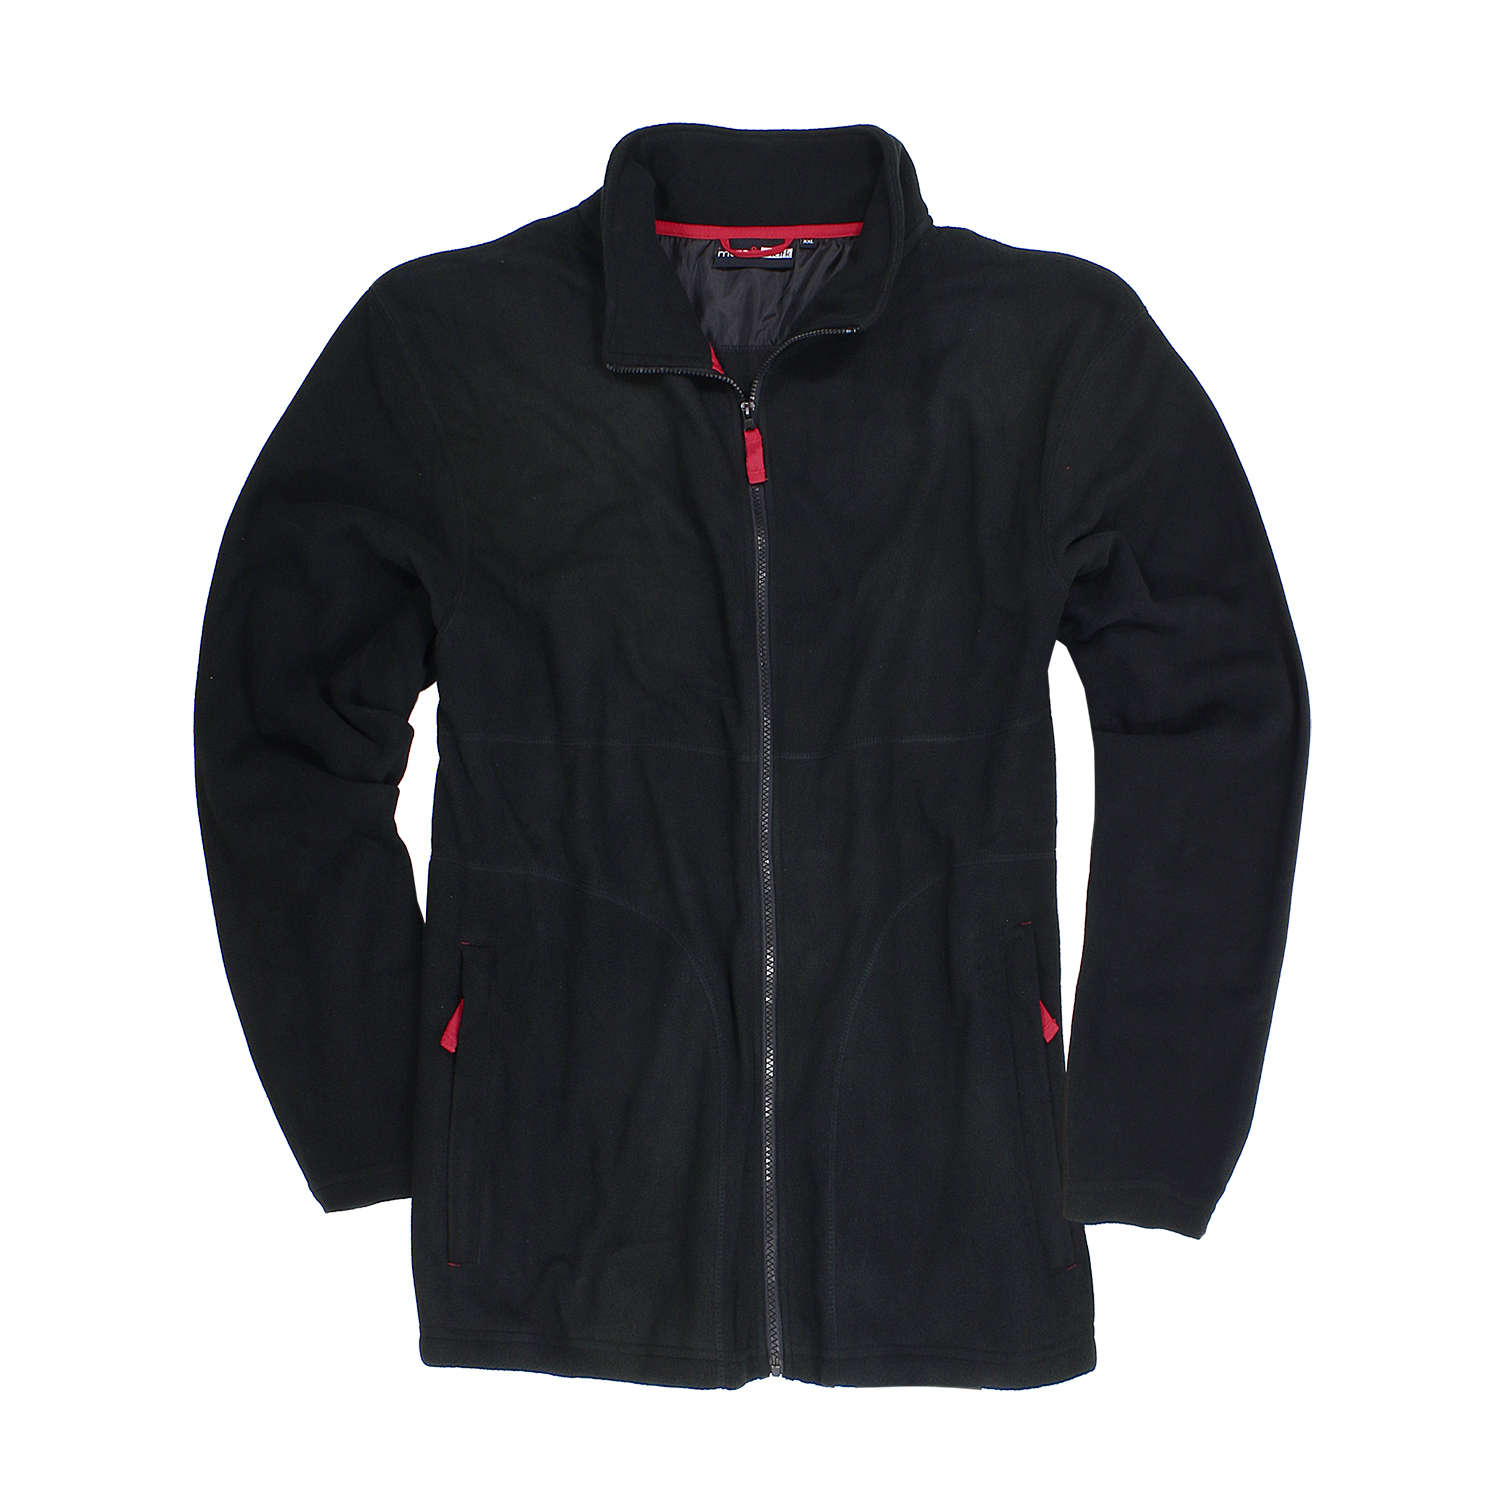 Fleece jacket in black by Marc&Mark in oversizes up to 12XL